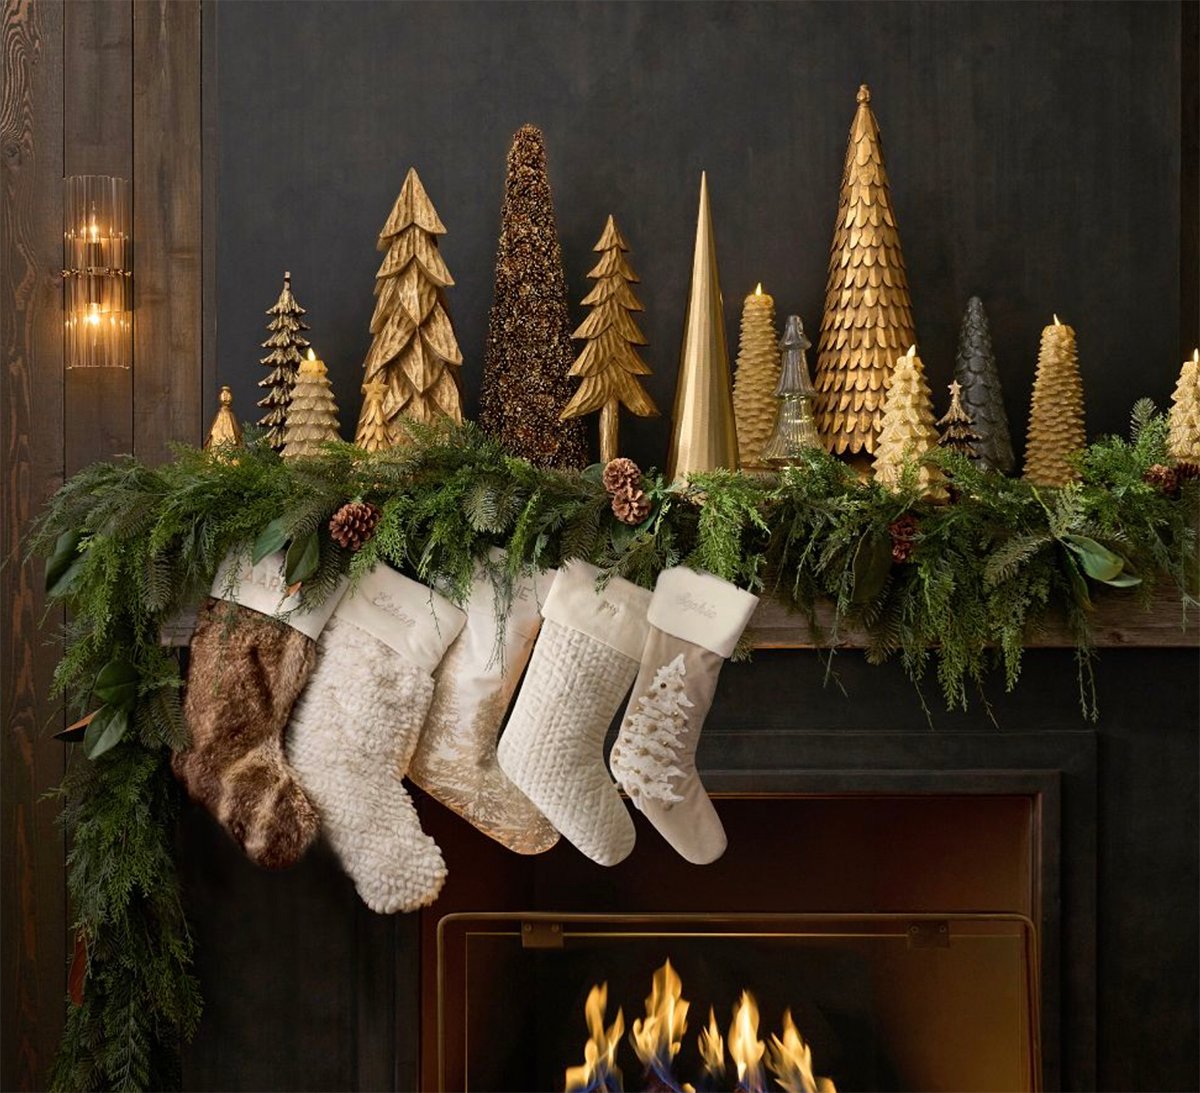 garland hung over a lit fire with stockings and gold christmas trees on the mantel